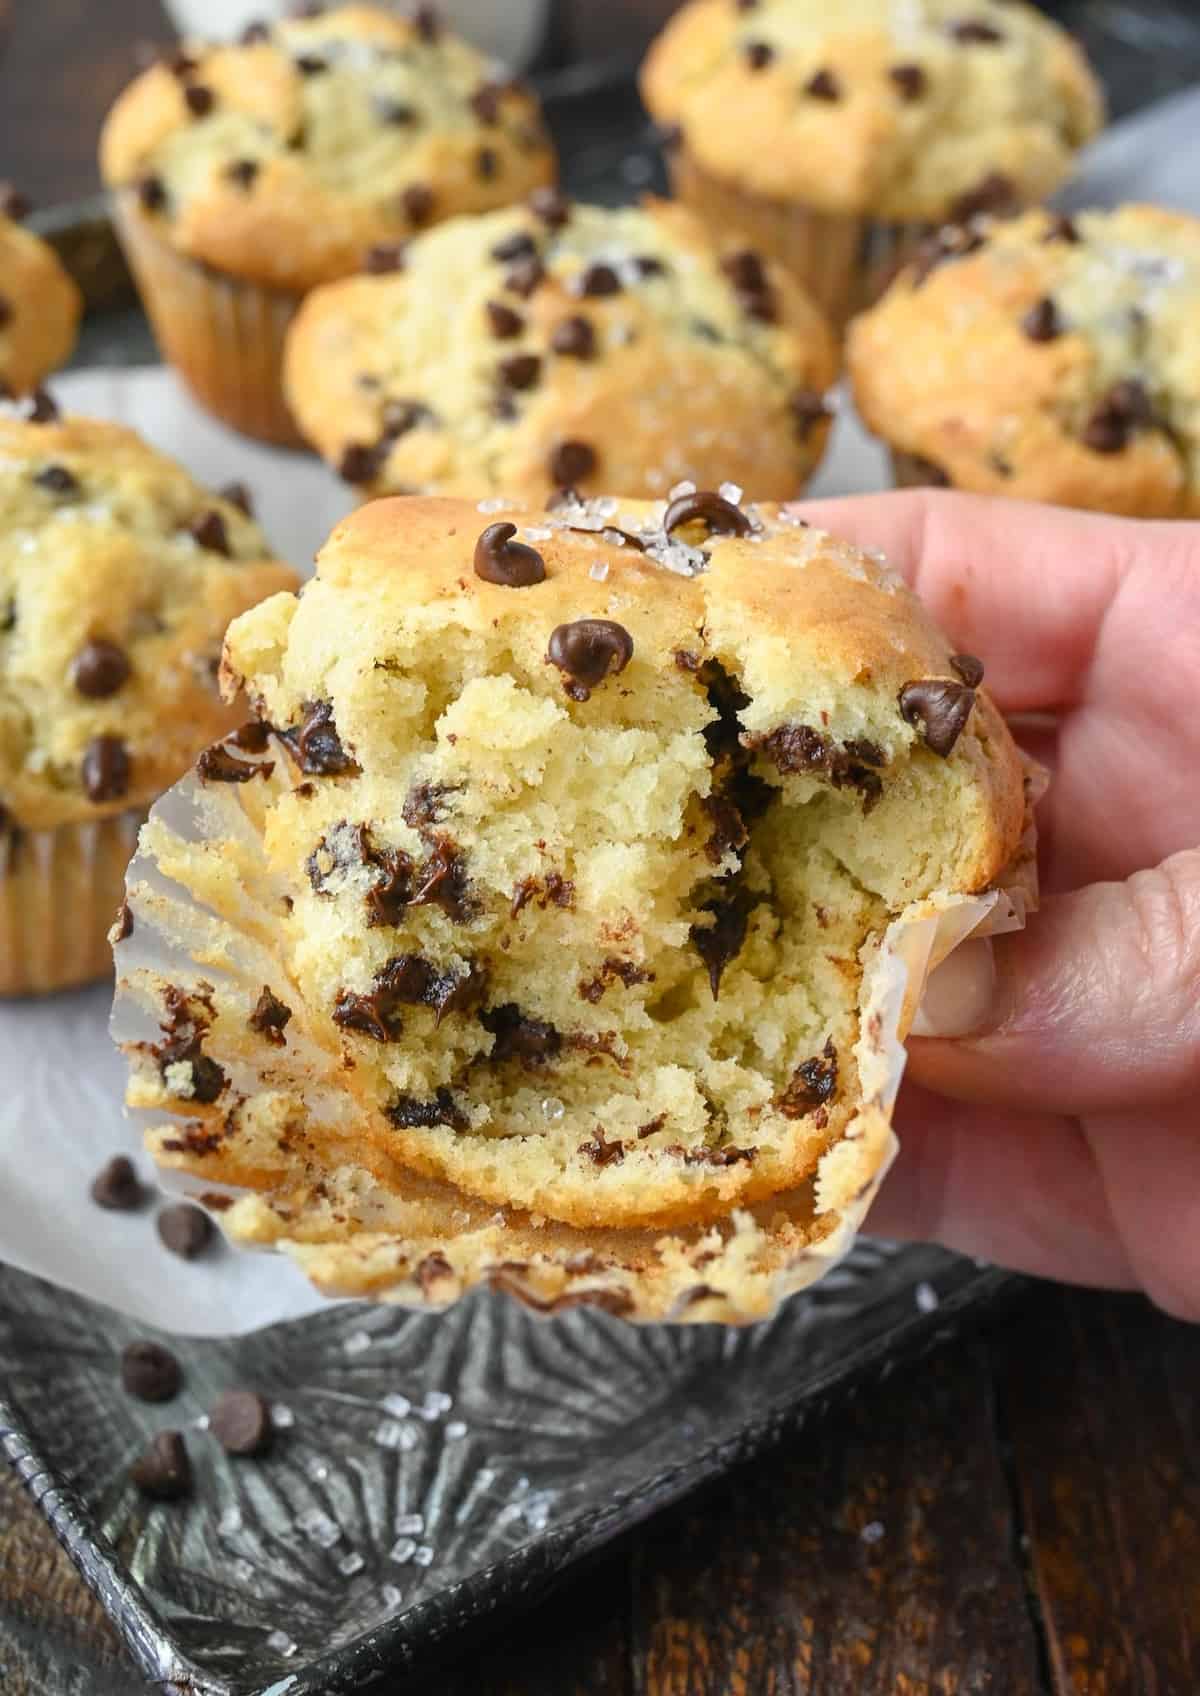 A bite out of a chocolate chip muffin.